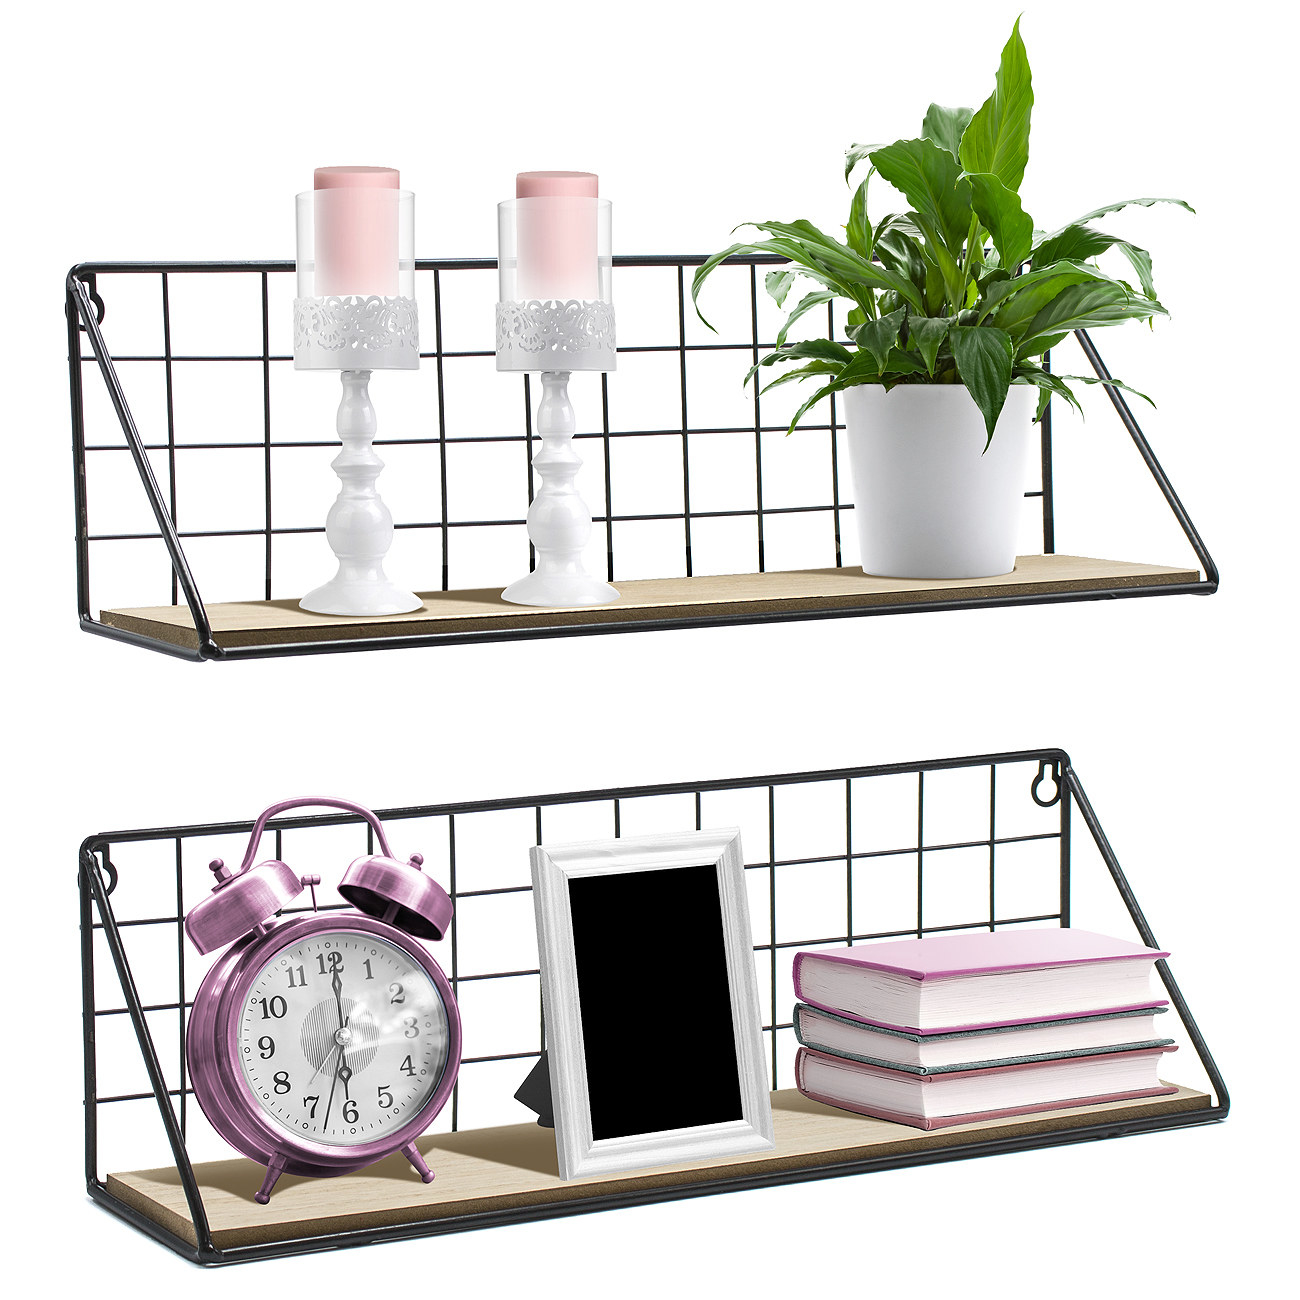 A set of two metal and wood shelves with items on it